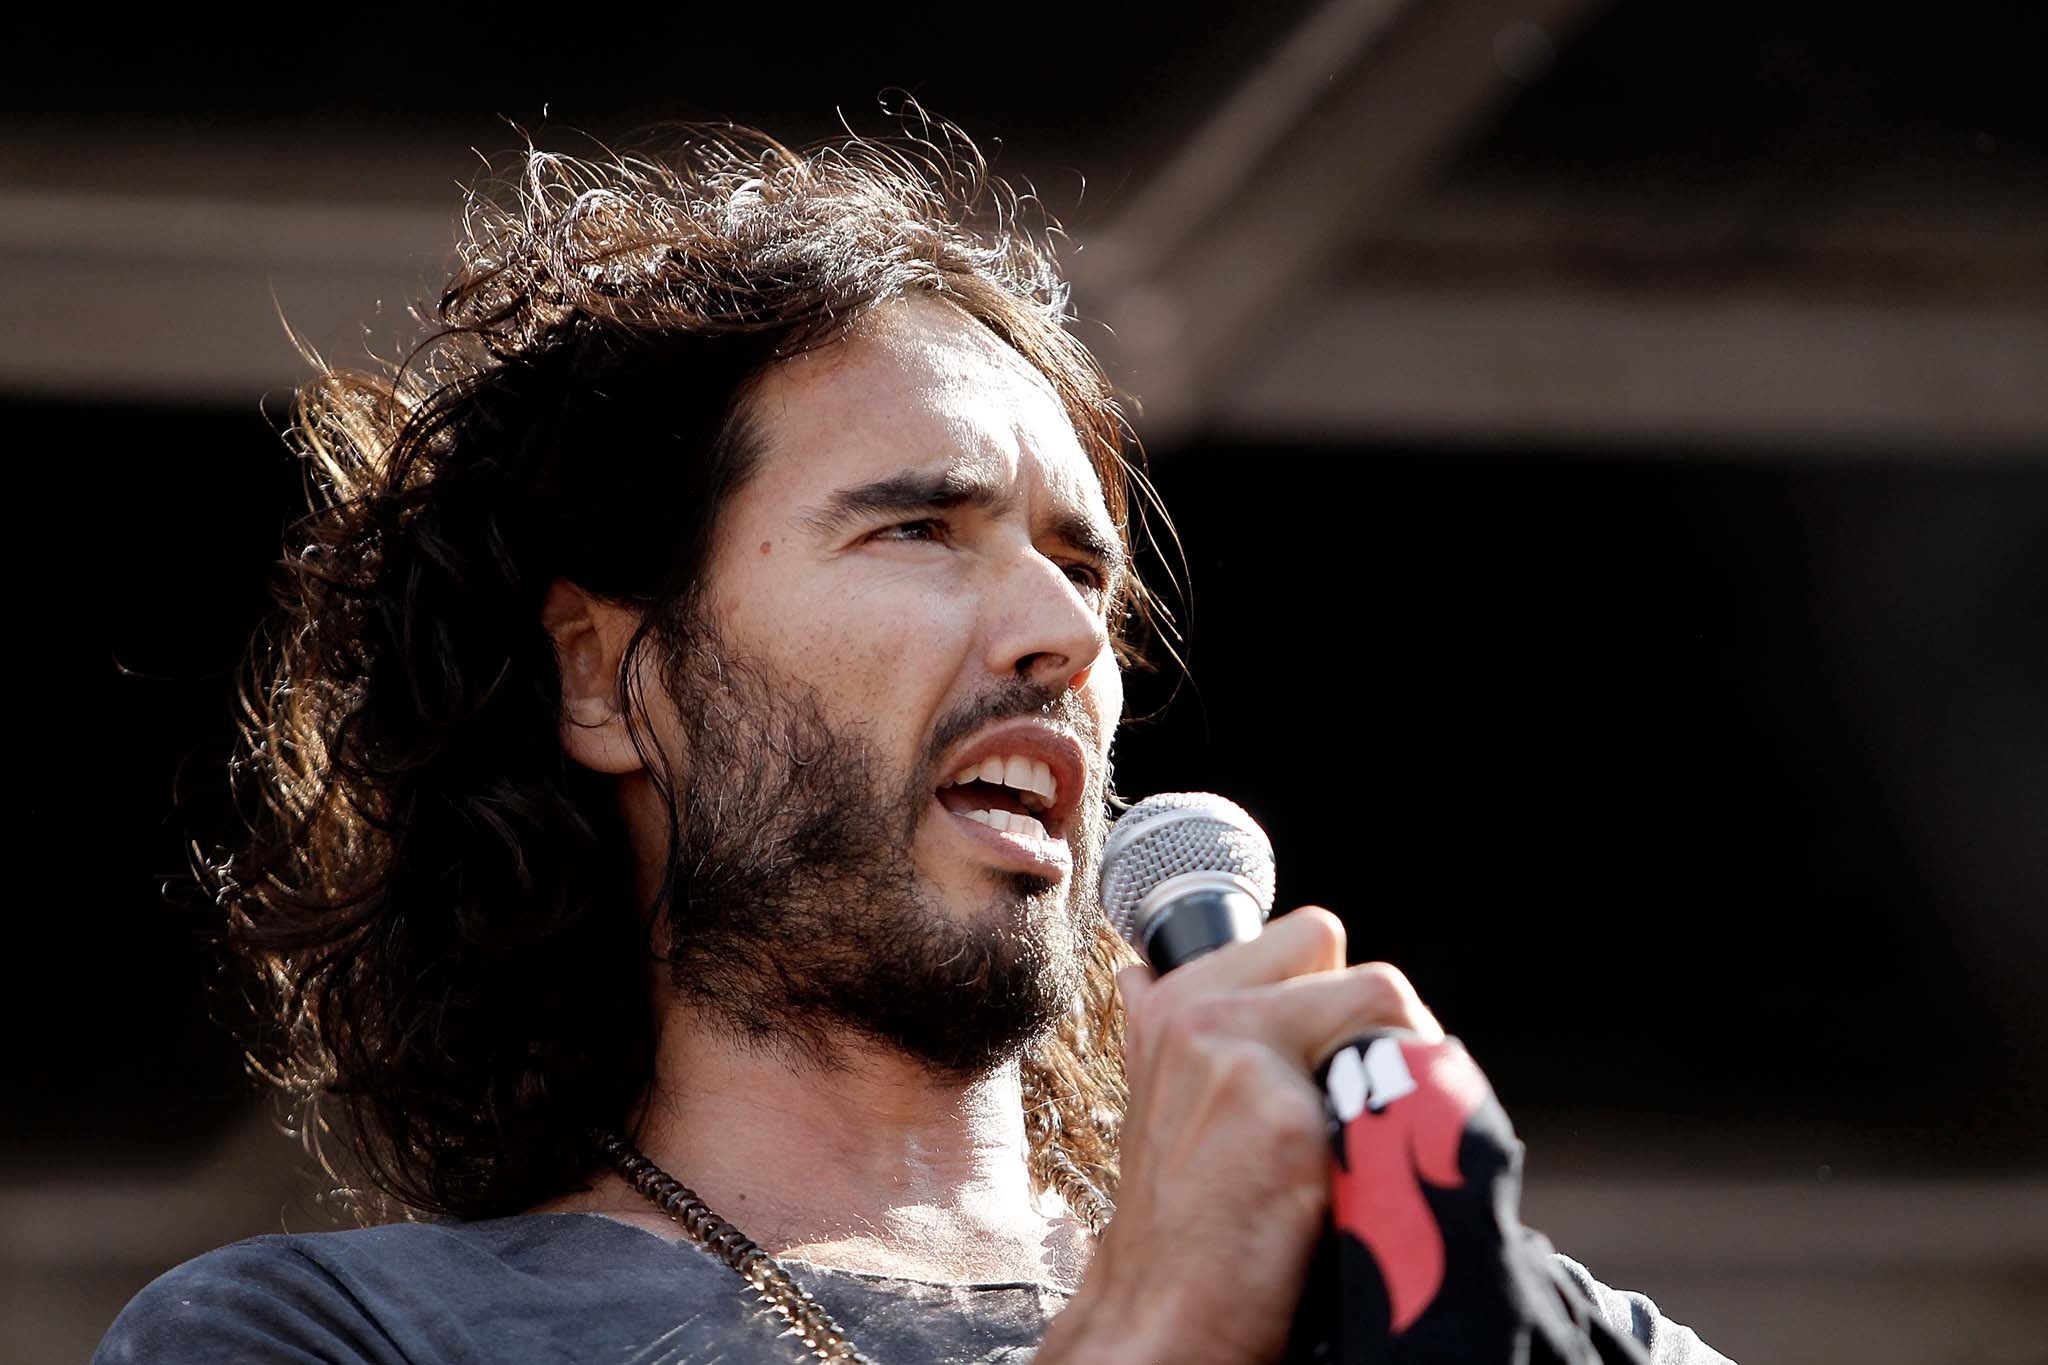 Russell Brand has written a book of political analysis called Revolution